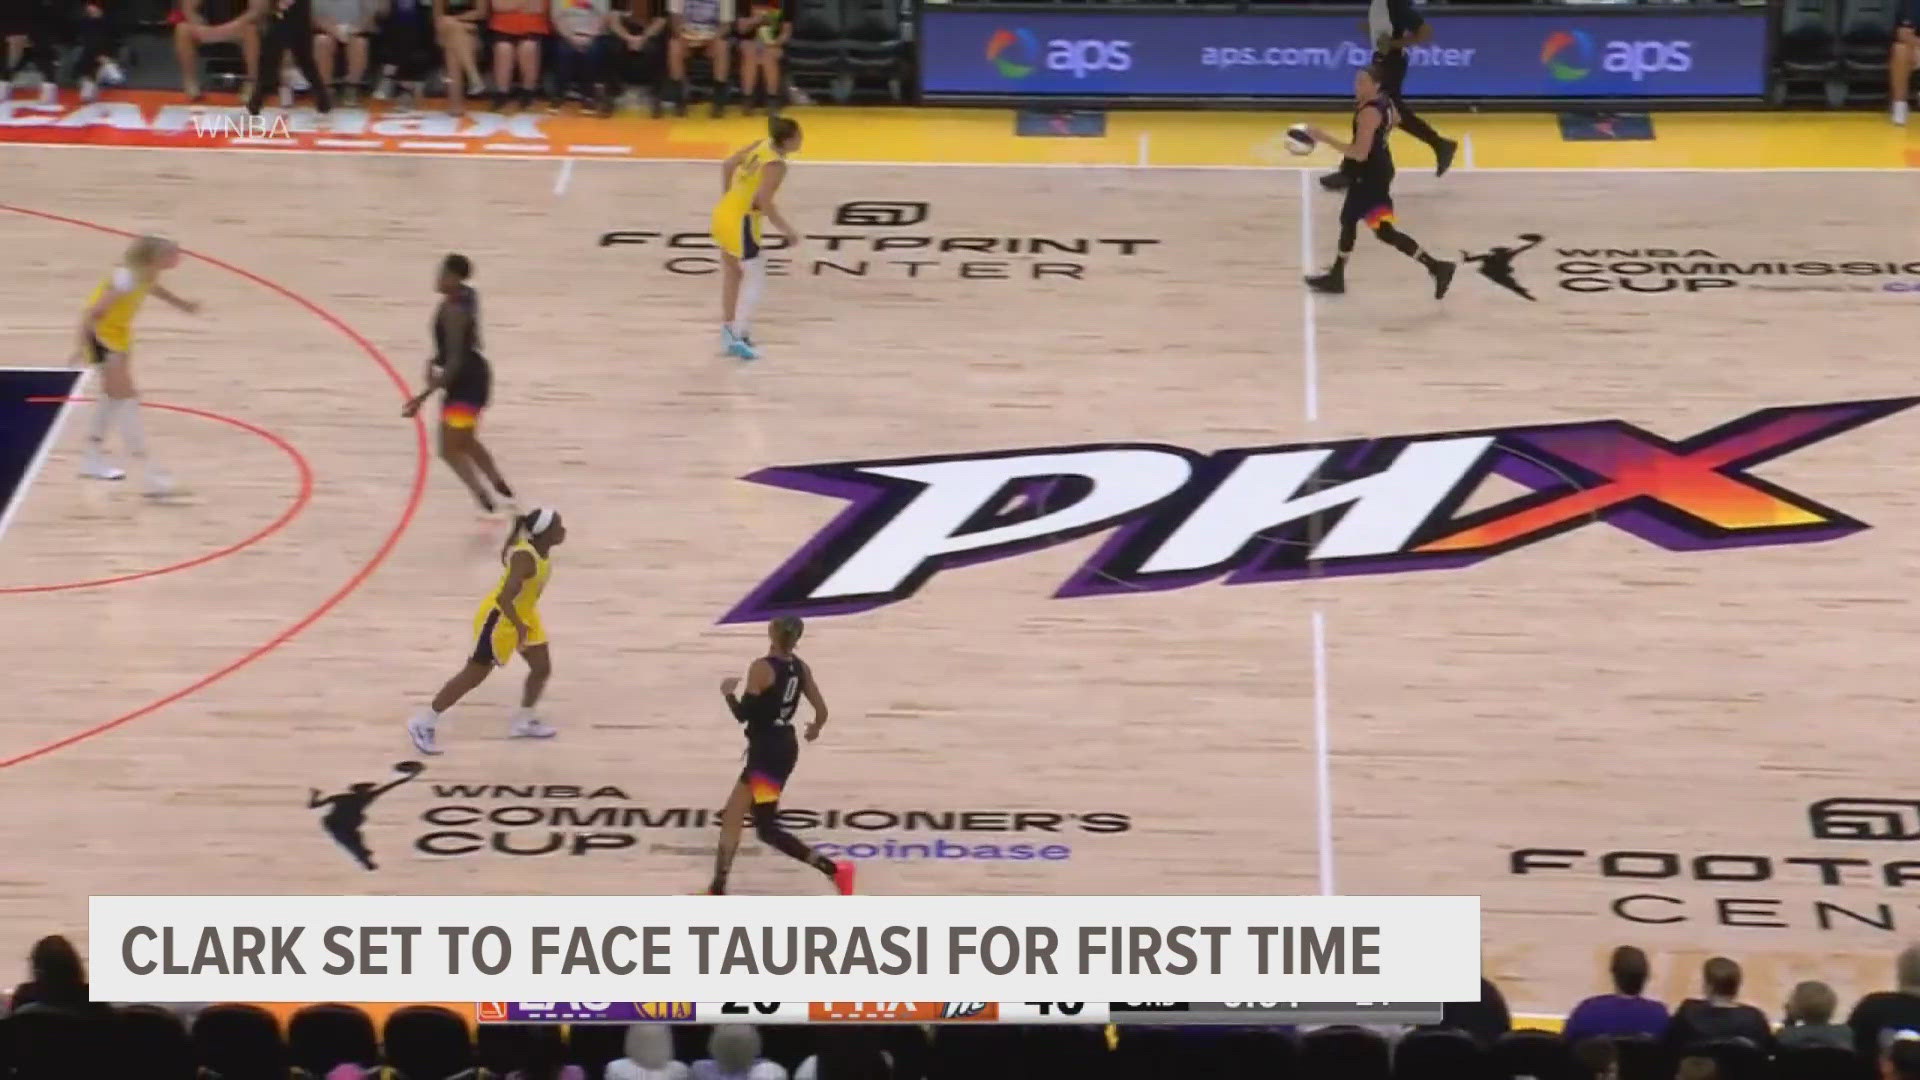 Taursi is the oldest player in the WNBA, but the superstar continues to average 16 points a game.